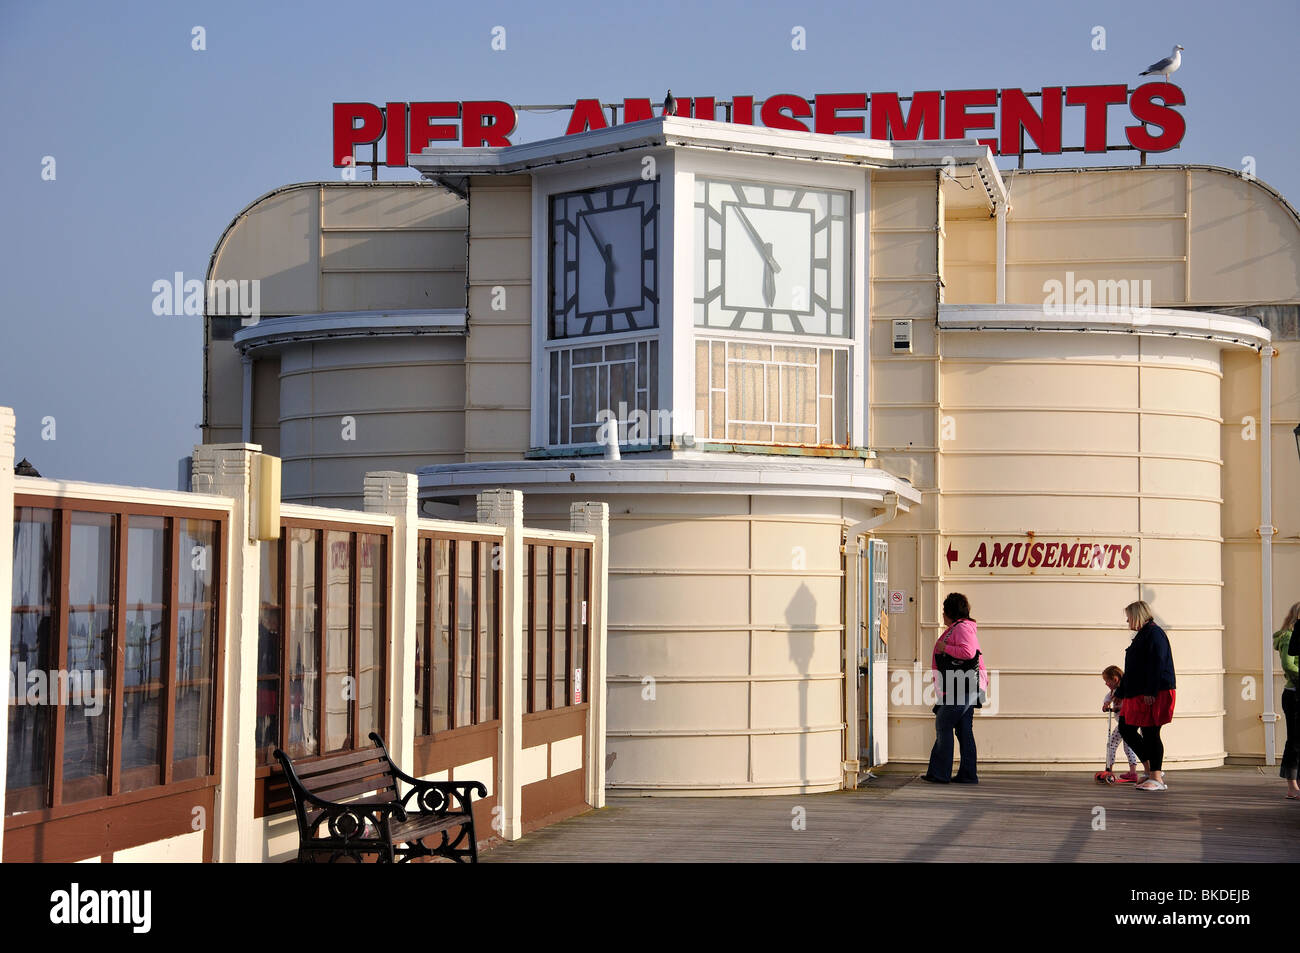 Sala giochi, Worthing Pier, Worthing, West Sussex, in Inghilterra, Regno Unito Foto Stock